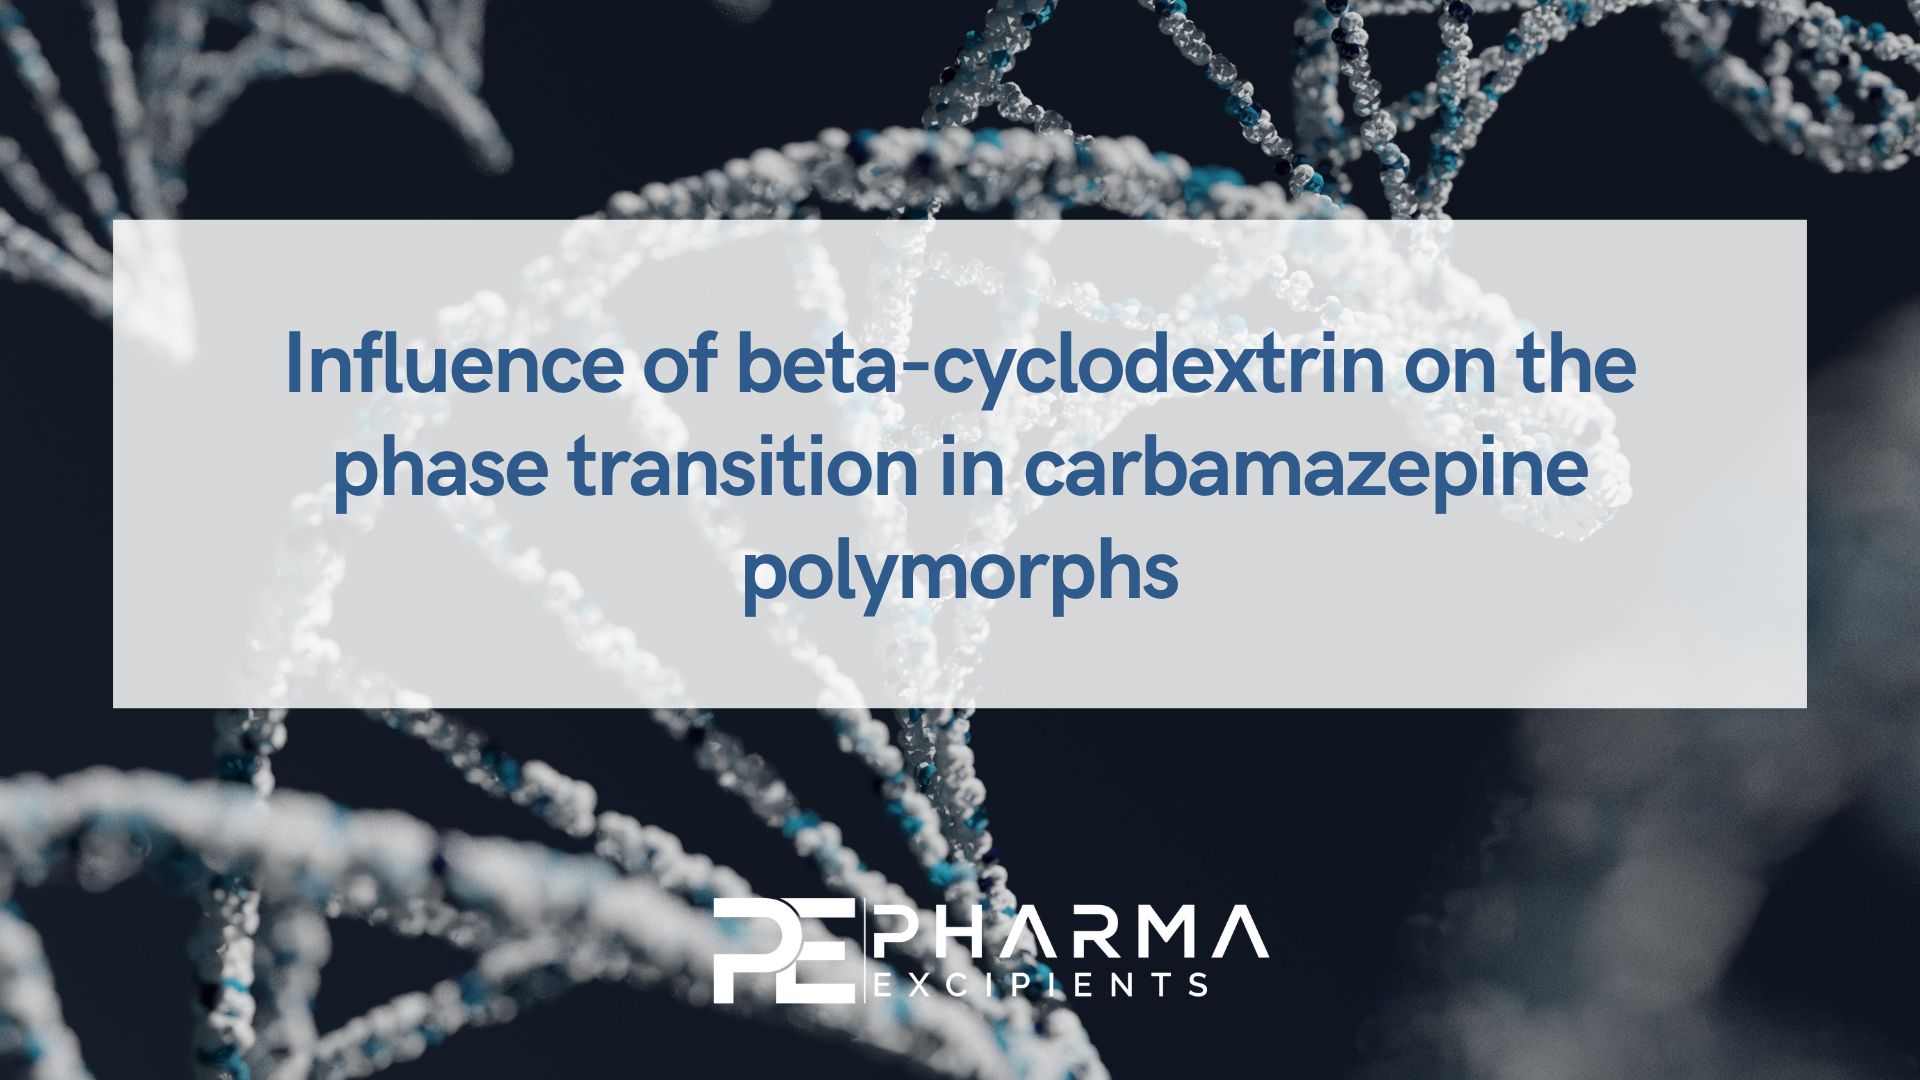 Influence of beta-cyclodextrin on the phase transition in carbamazepine polymorphs